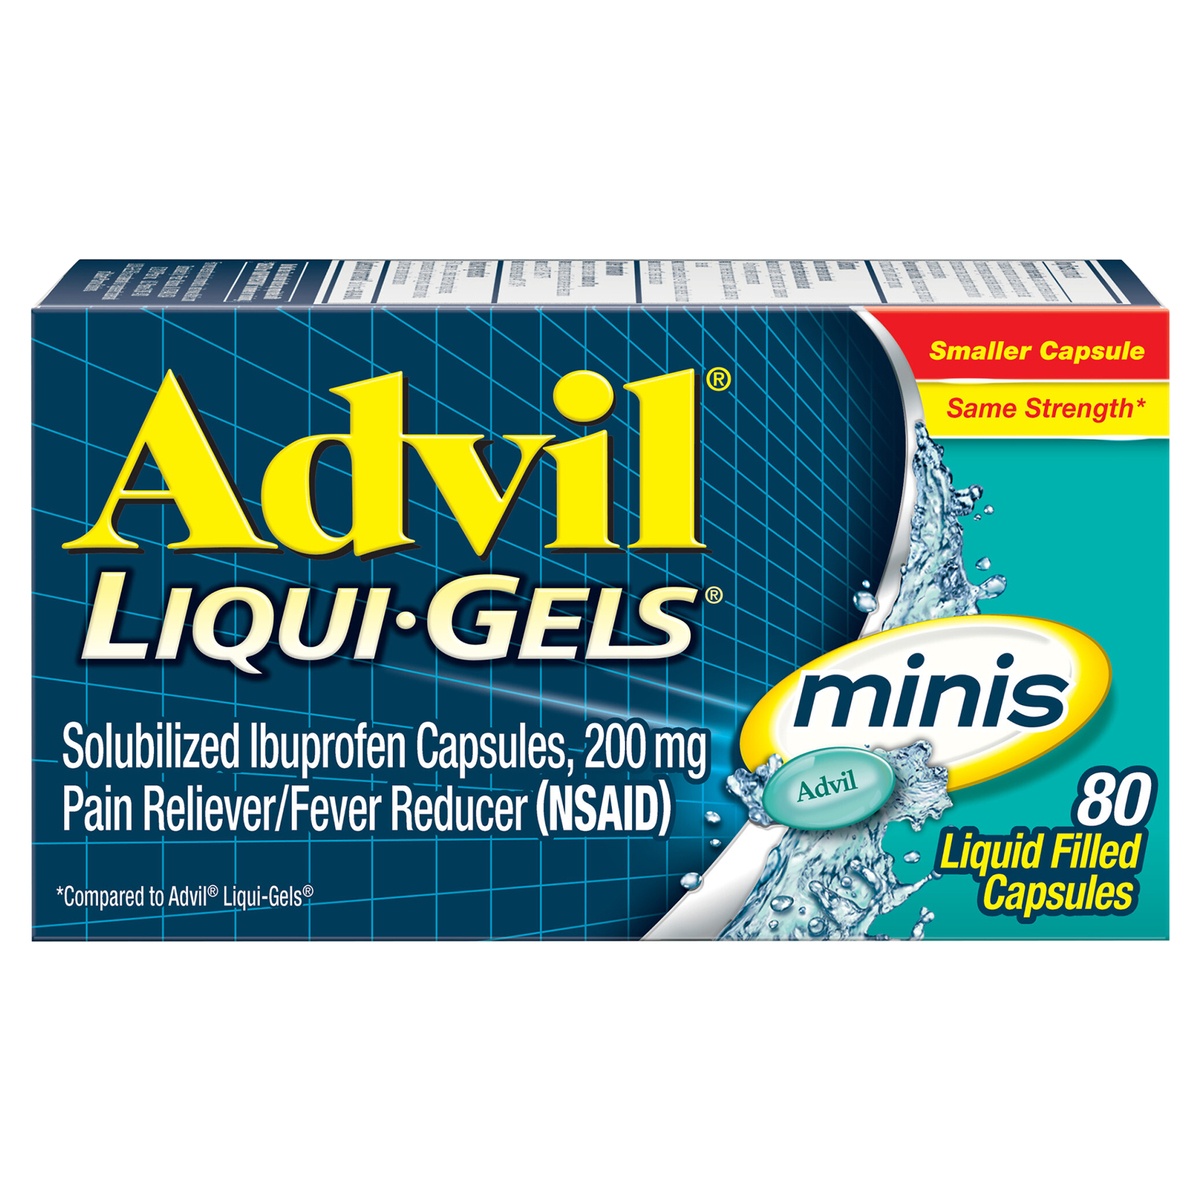 slide 1 of 1, Advil Liqui-Gels minis Pain Reliever and Fever Reducer, Ibuprofen 200mg for Pain Relief - 80 Liquid Filled Capsules, 80 ct